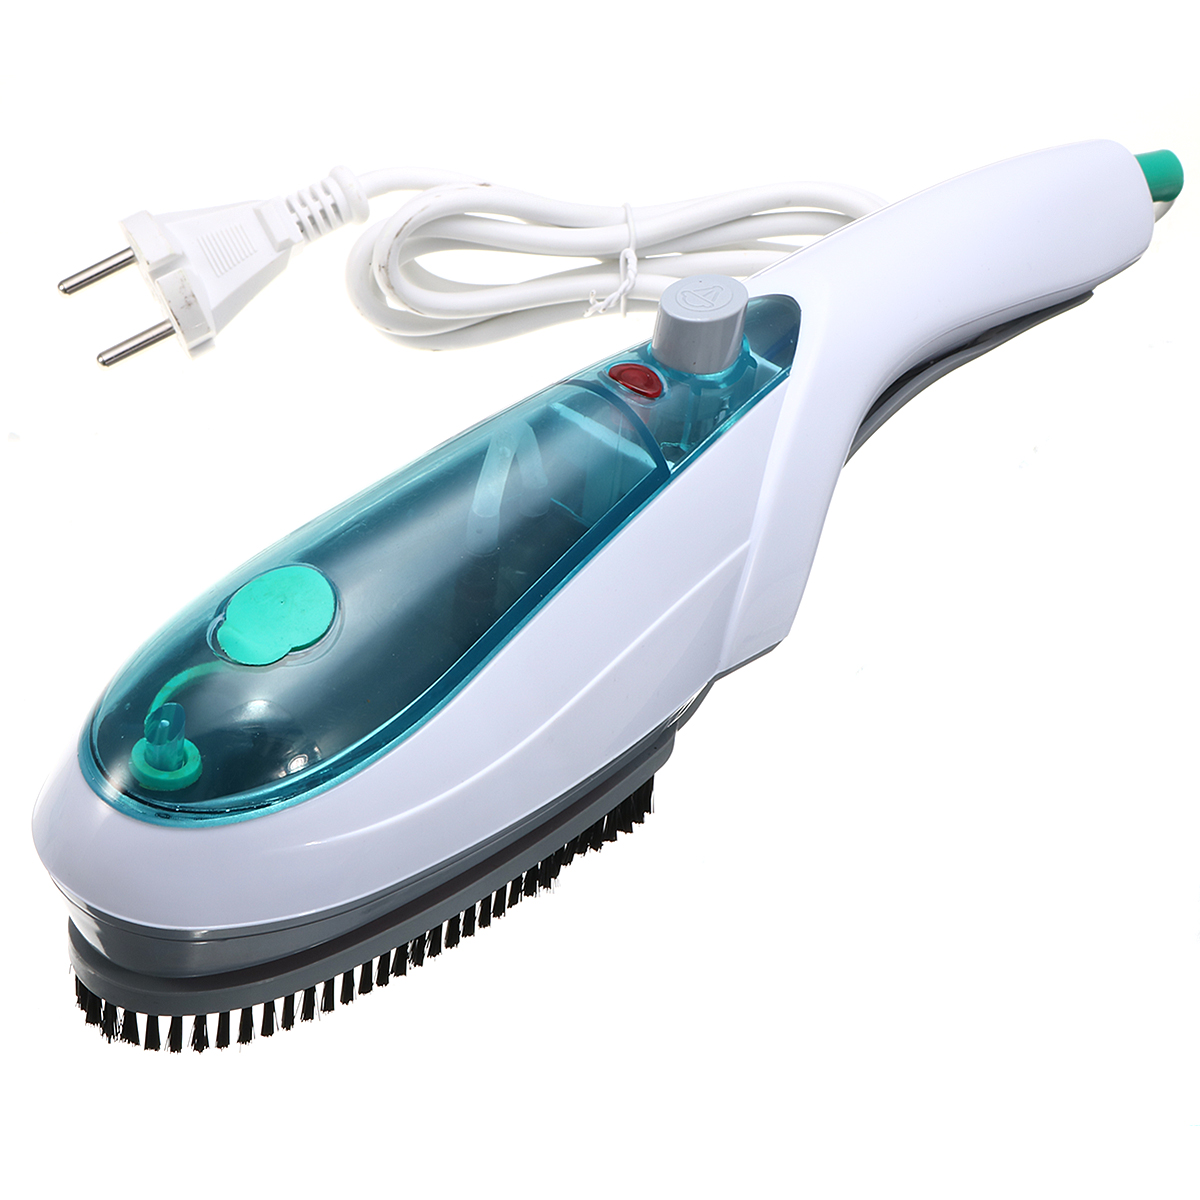 Multifunction Portable Garment Steamer Handheld Electric Steam Iron Kit For Home Travelling Fabric Clothes Cleaning Brush